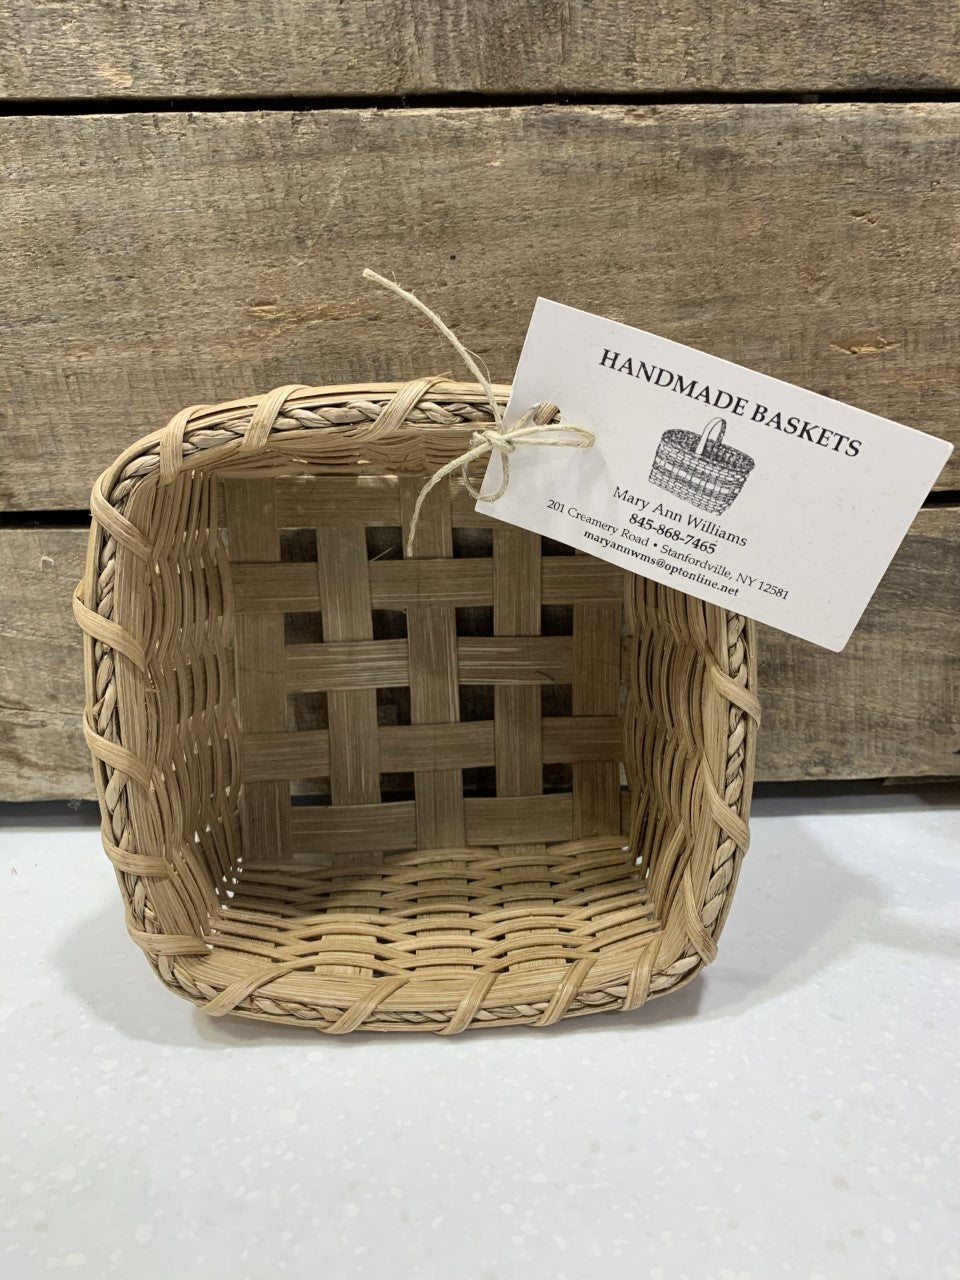 Perfect catch-all basket for counter top, display, or gifting. Locally made in the Hudson Valley by master basket weaver, Mary Ann Williams. Approximate size 6